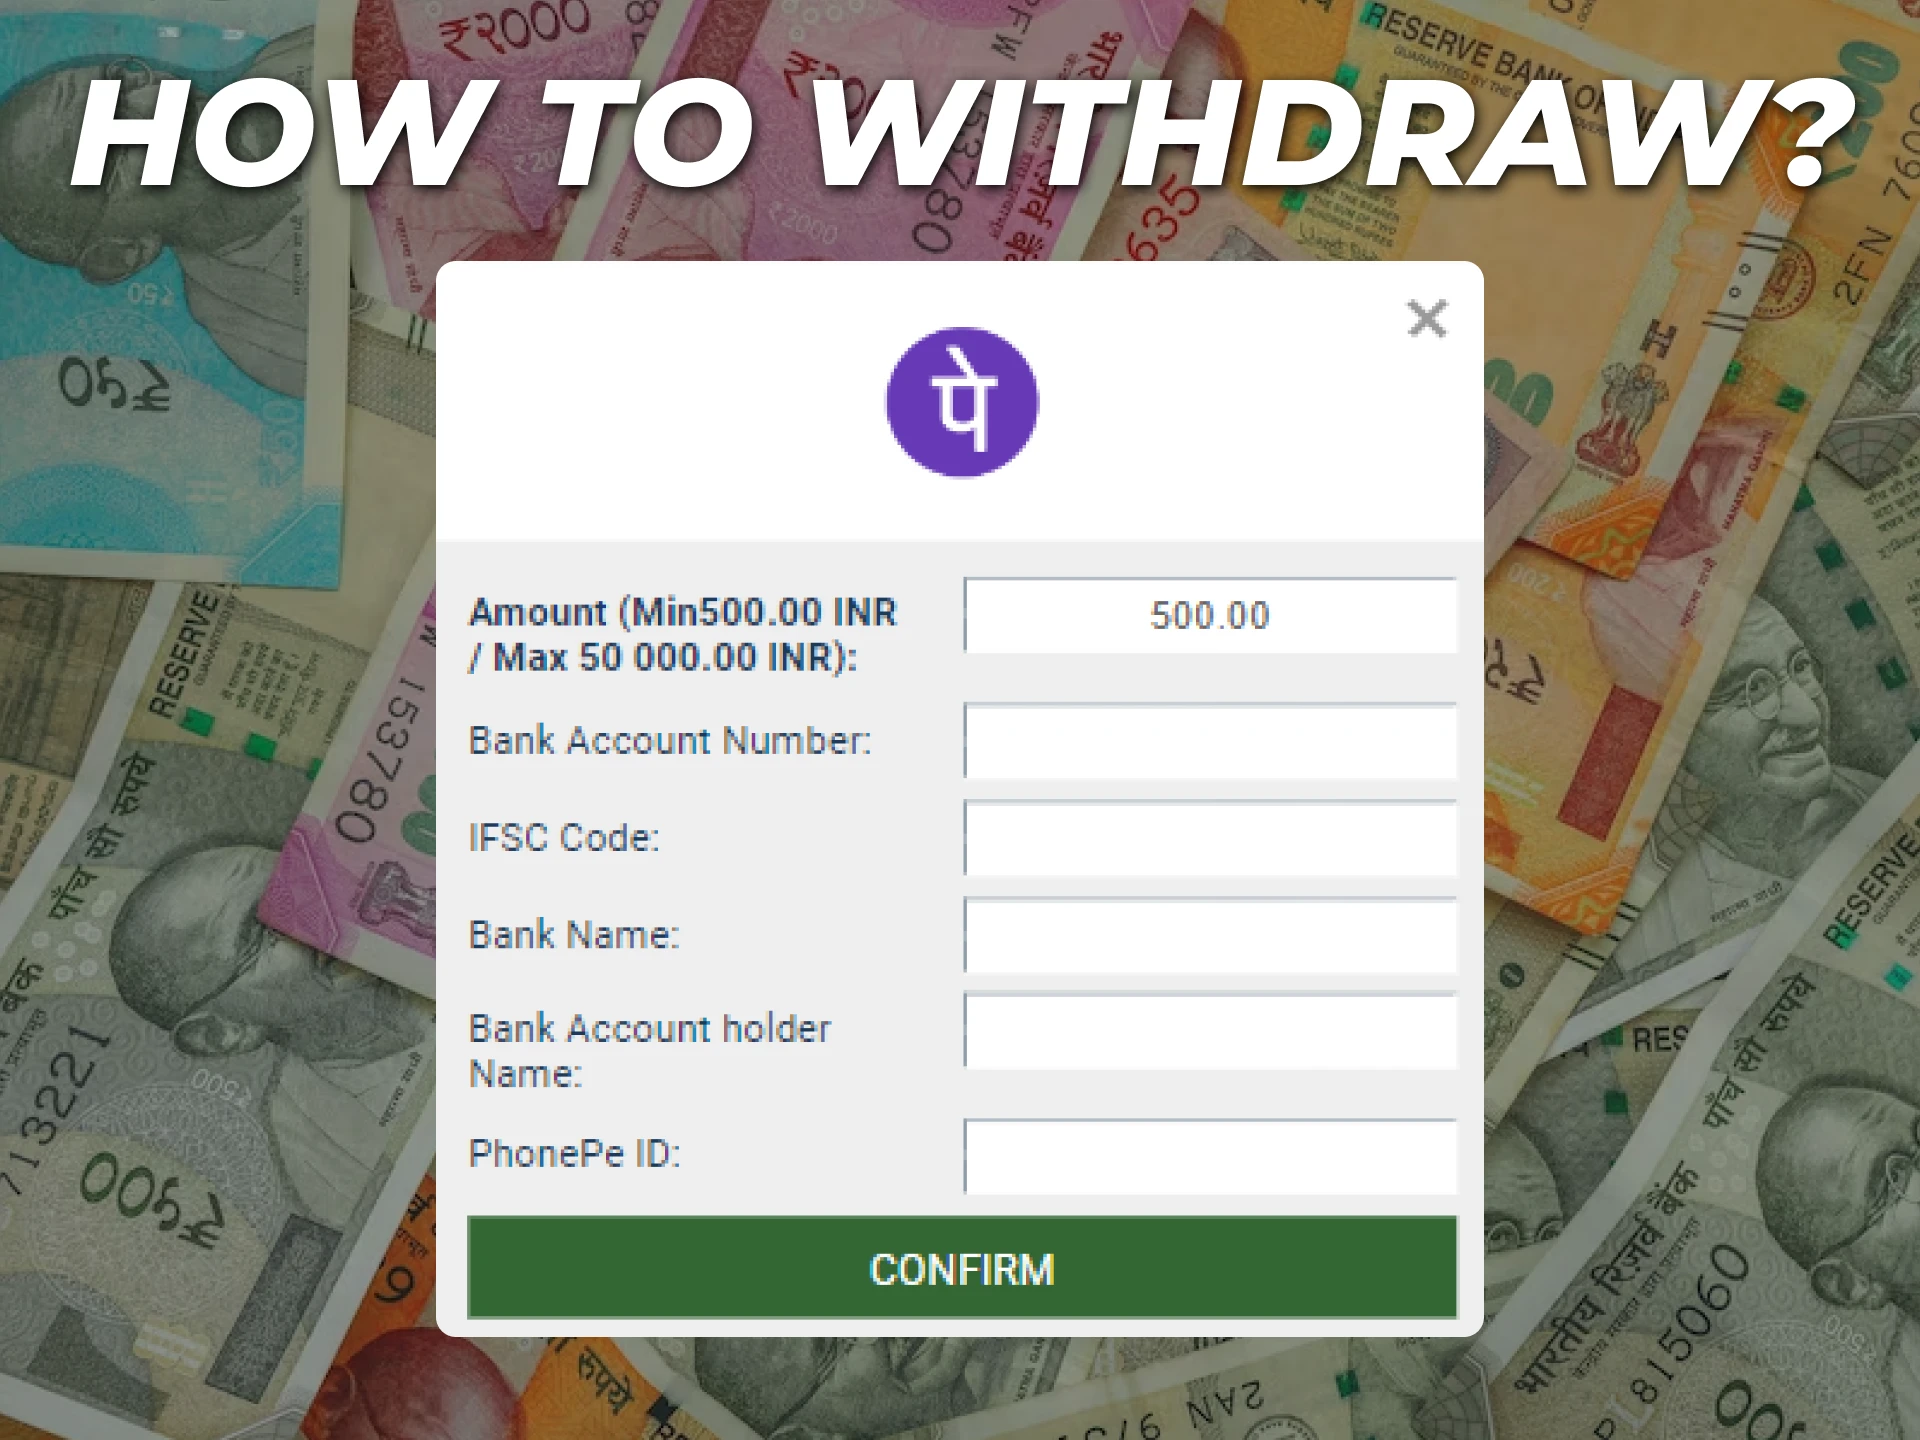 Withdrawing money is a simple process, read this guide.